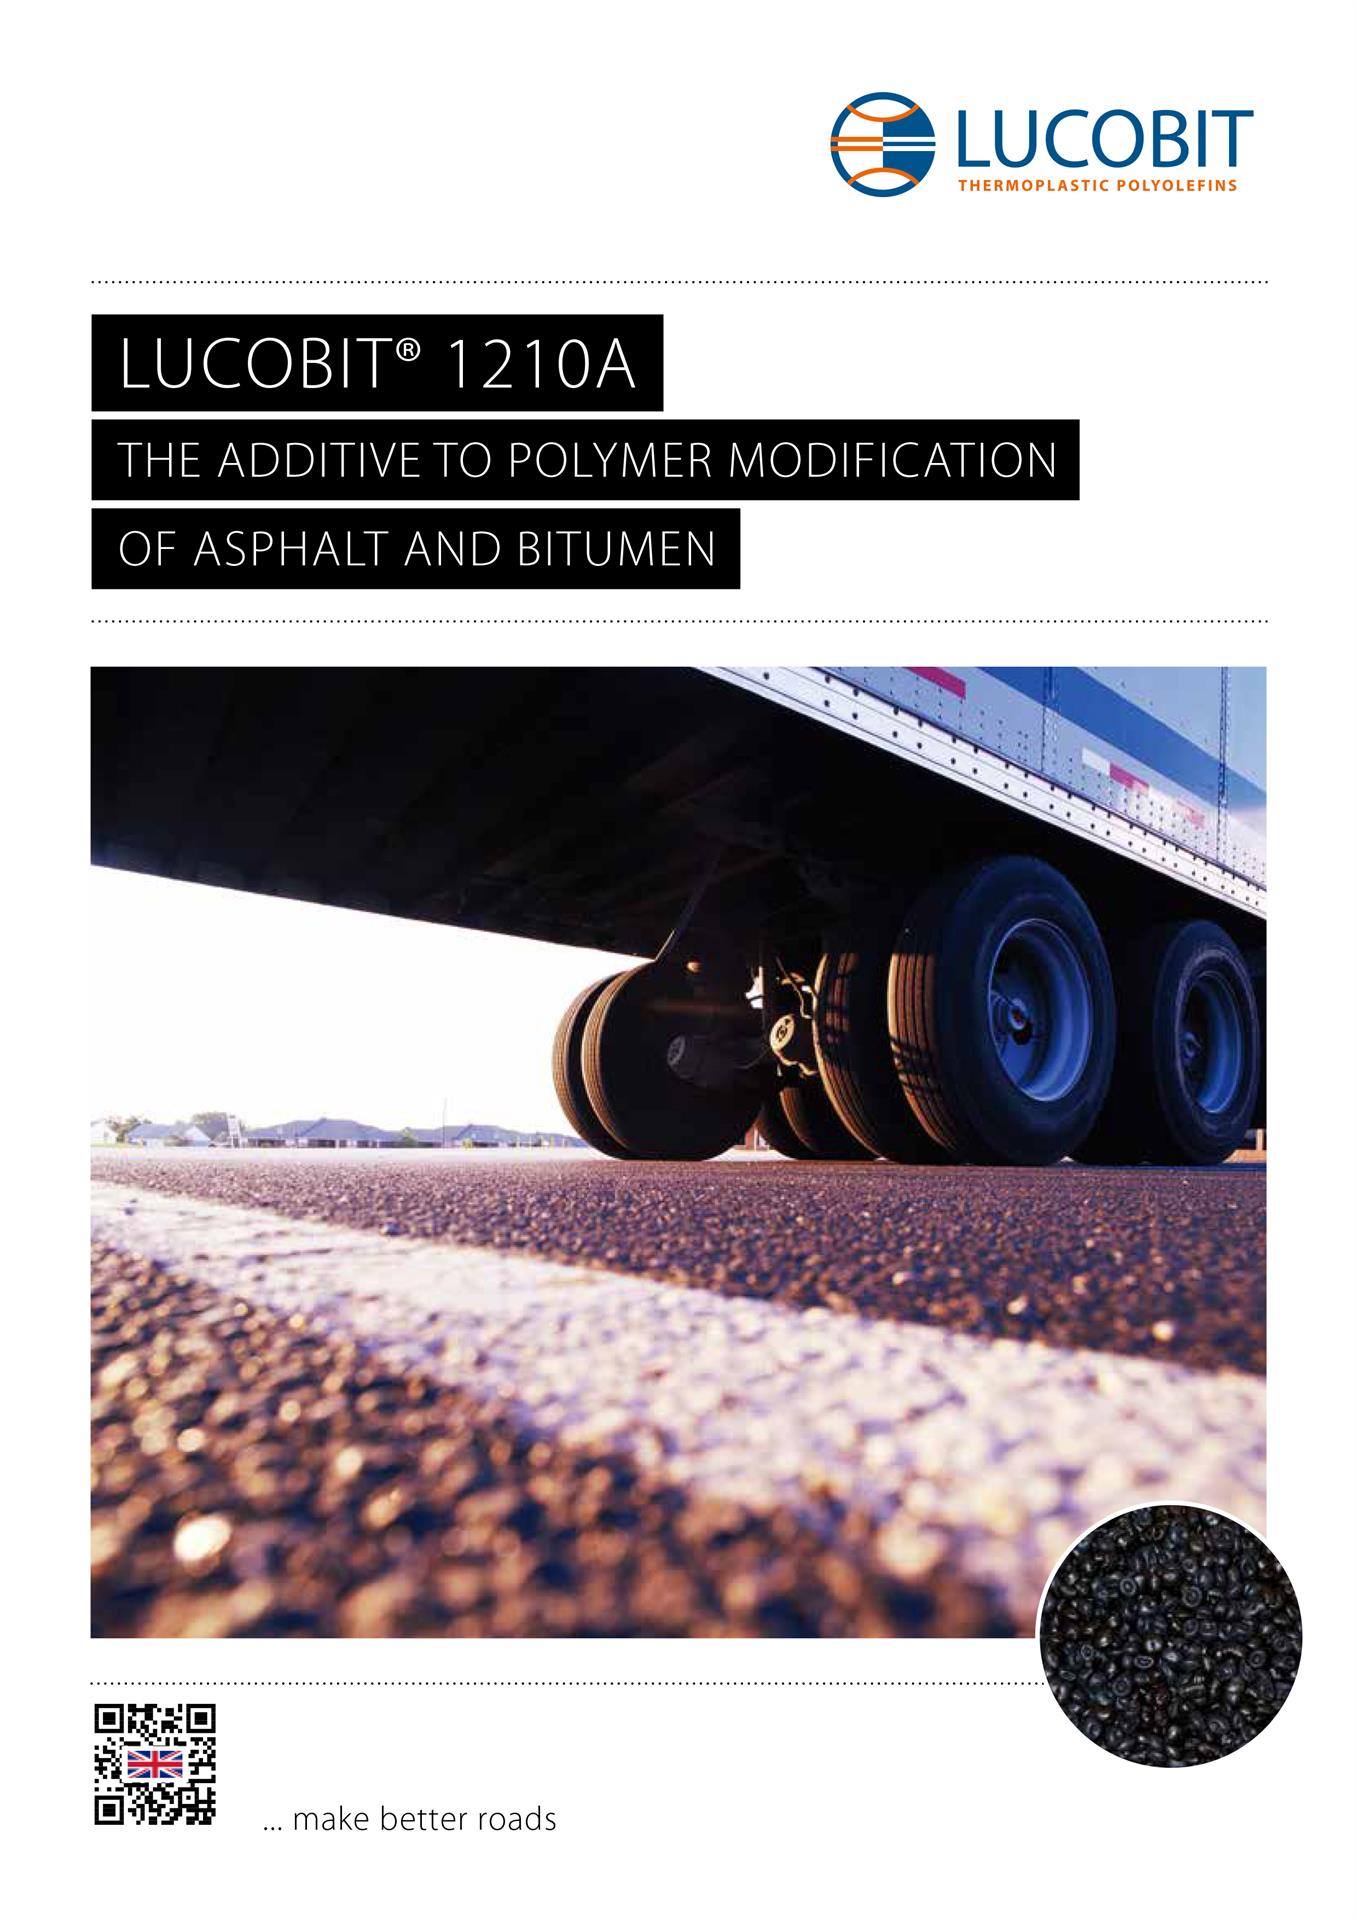 LUCOBIT 1210A Broschüre - THE ADDITIVE TO POLYMER MODIFICATION OF ASPHALT AND BITUMEN